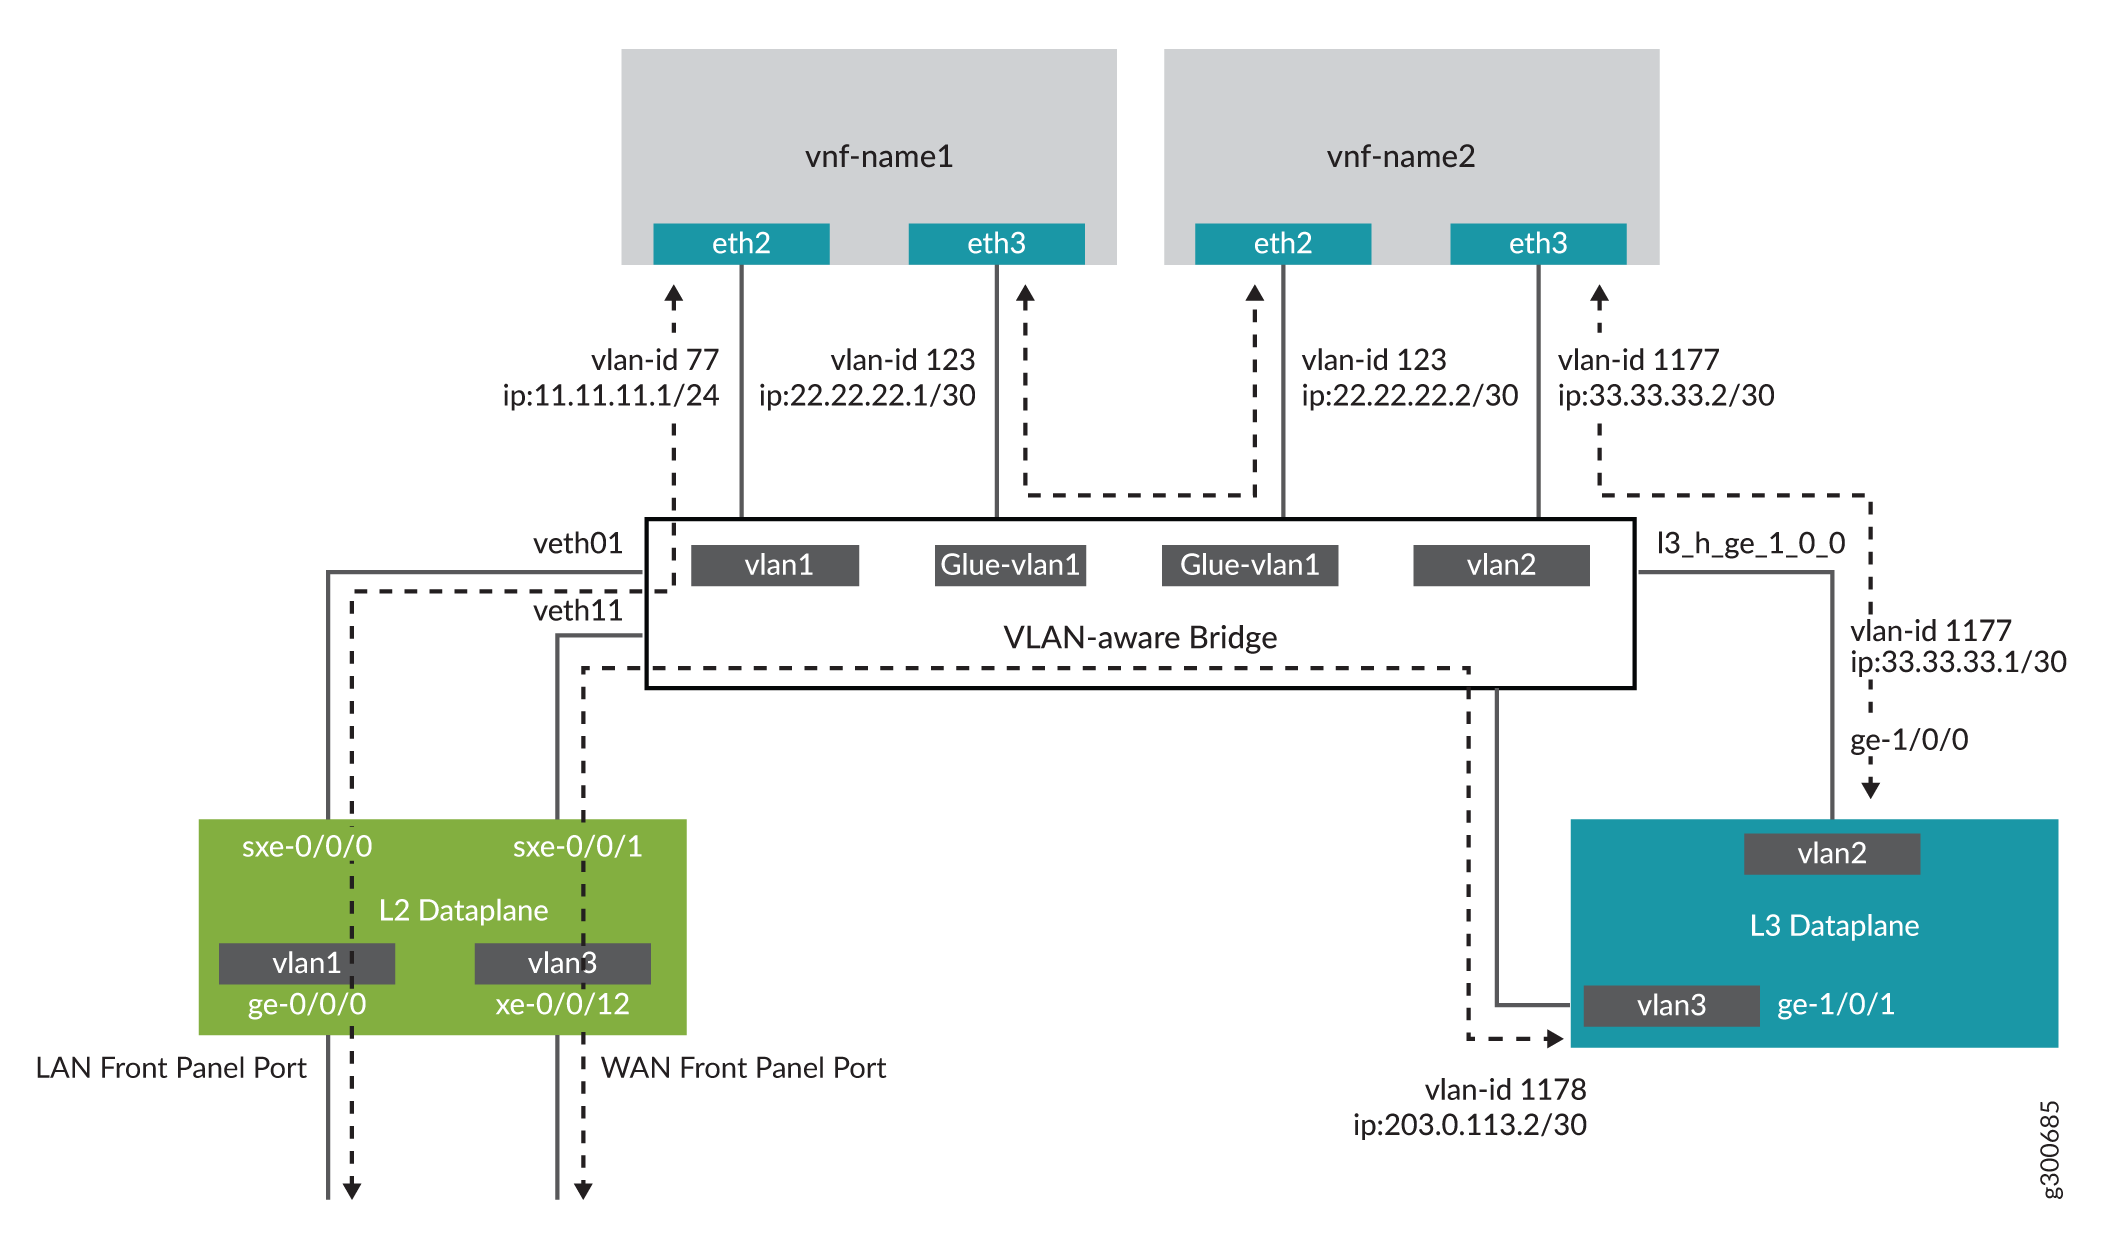 Service Chaining for LAN to WAN Routing through Third-party VNFs